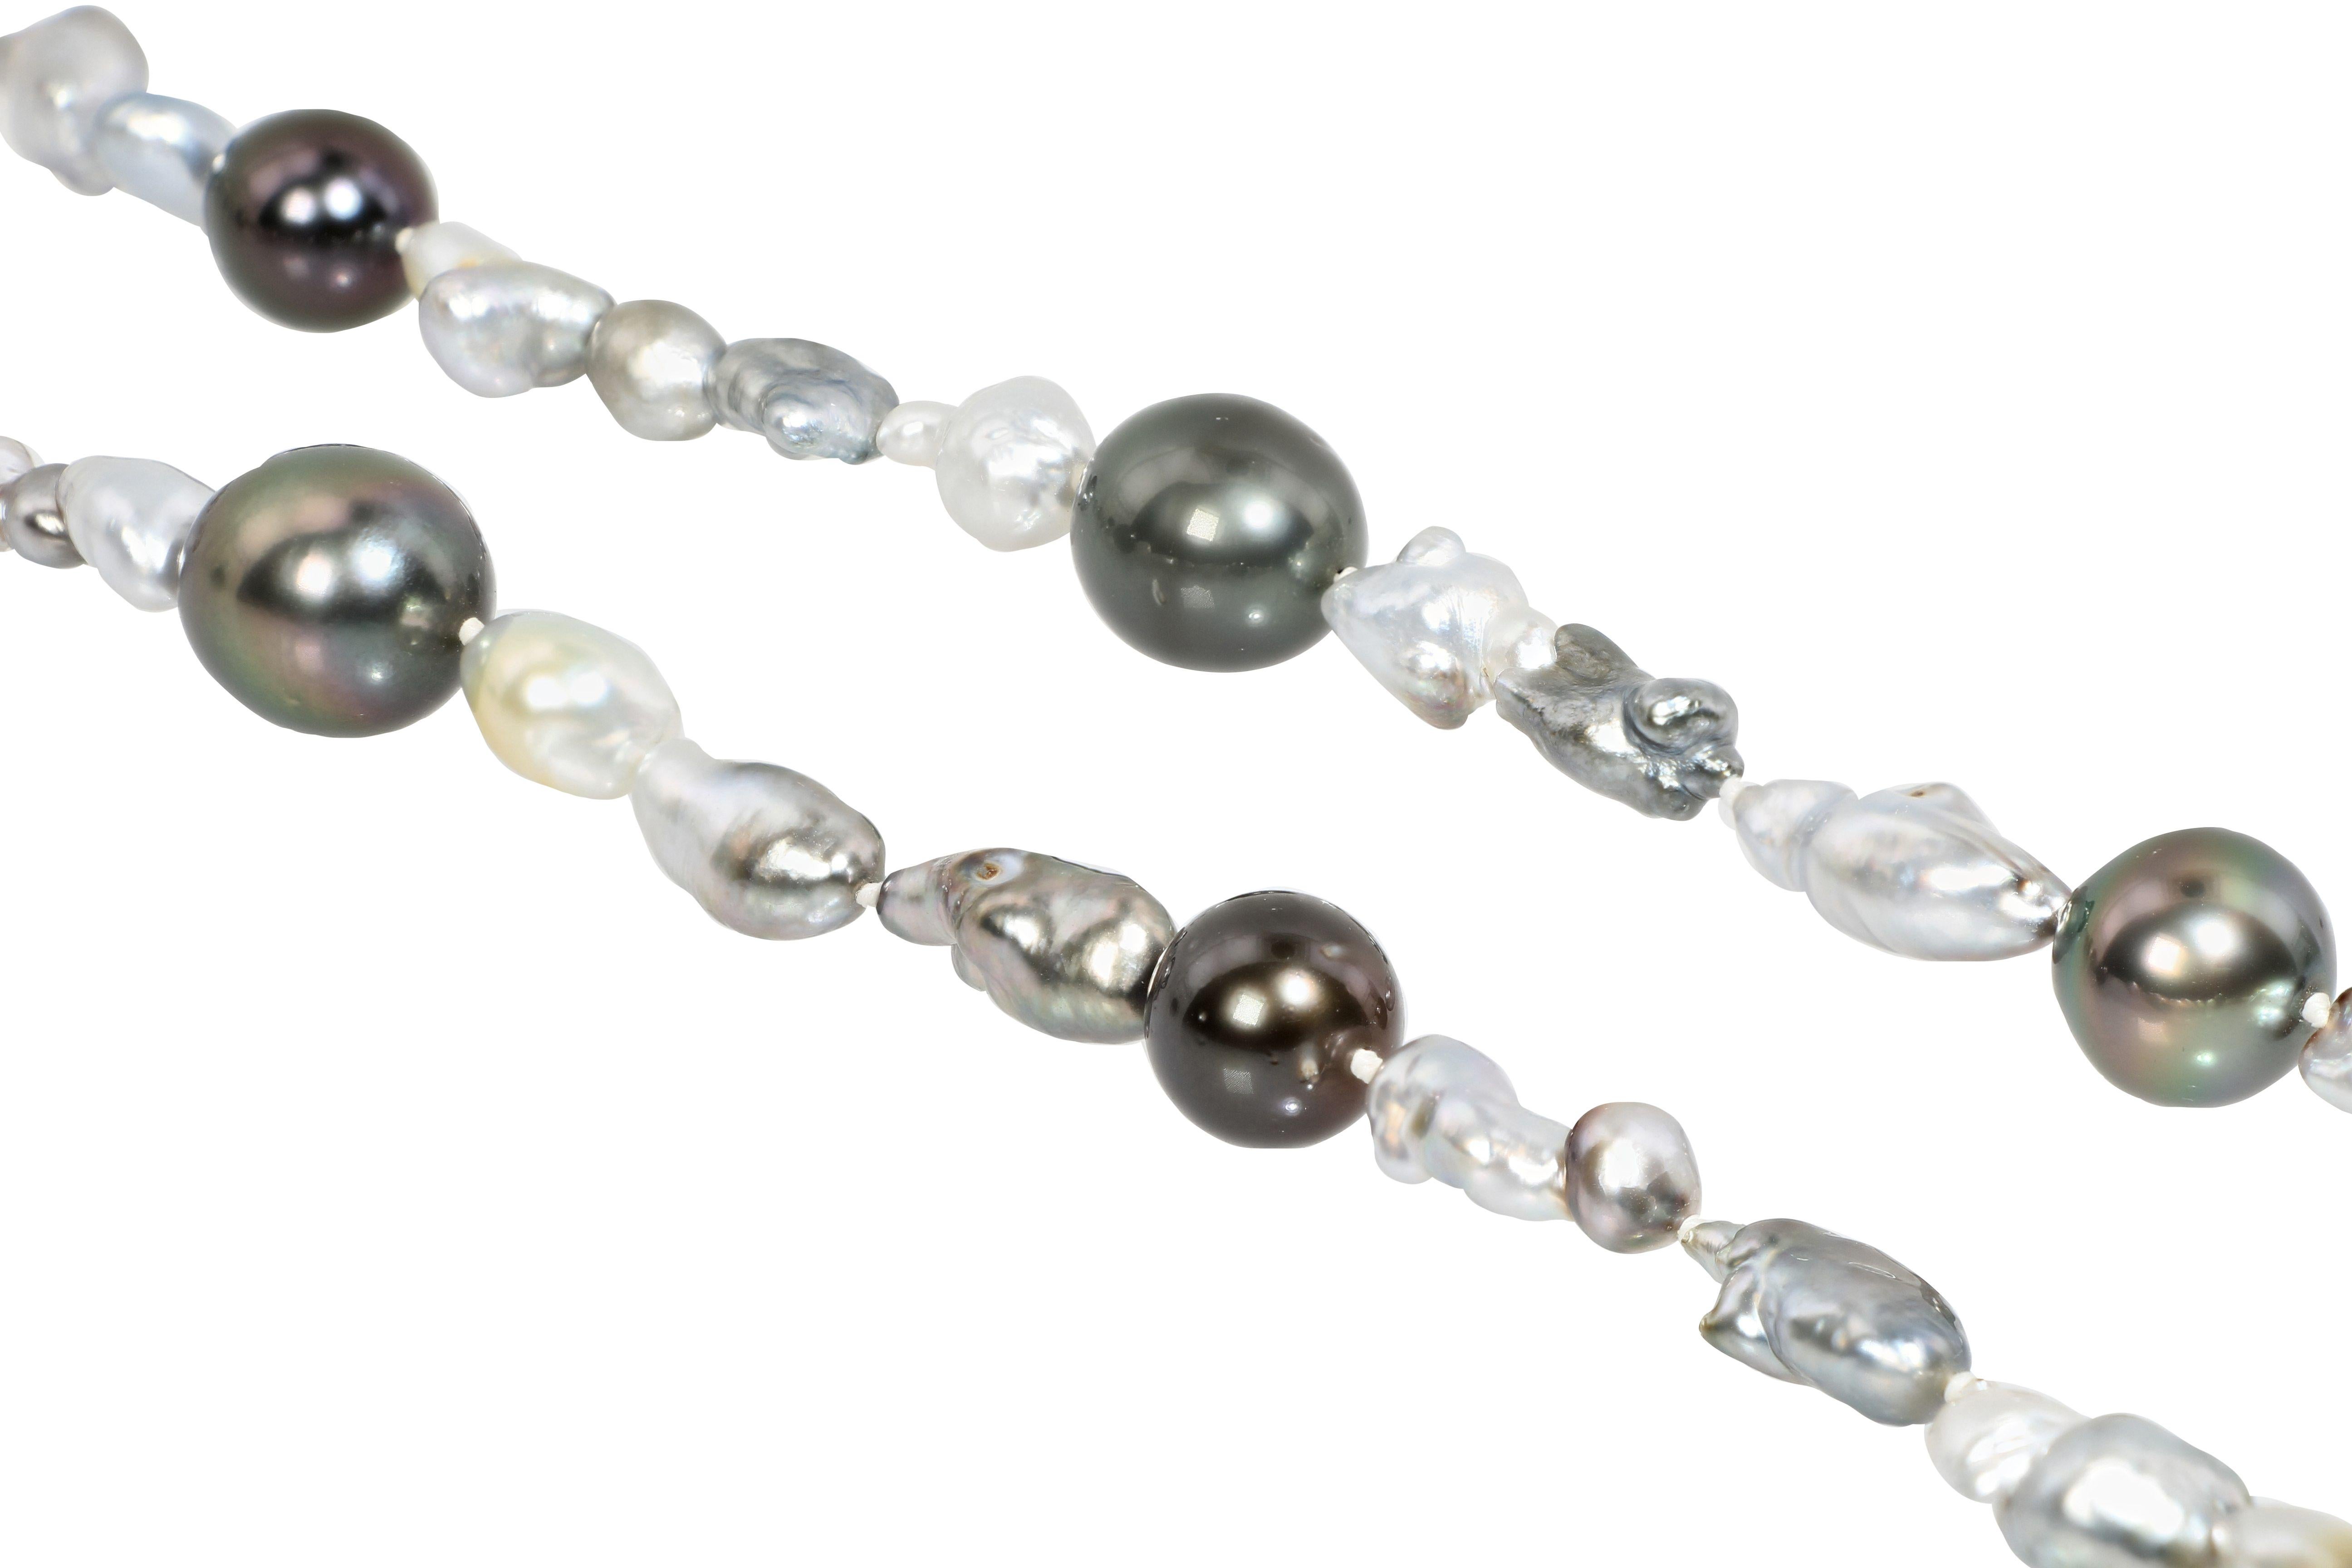        An unique and fashionable pearl necklace, composed of 73 pieces of pearl of different sizes with diameter from 6mm to 11mm, including Tahitian pearls and South Sea keshi pearls. It is a very stylish and elegant piece of jewellery matching